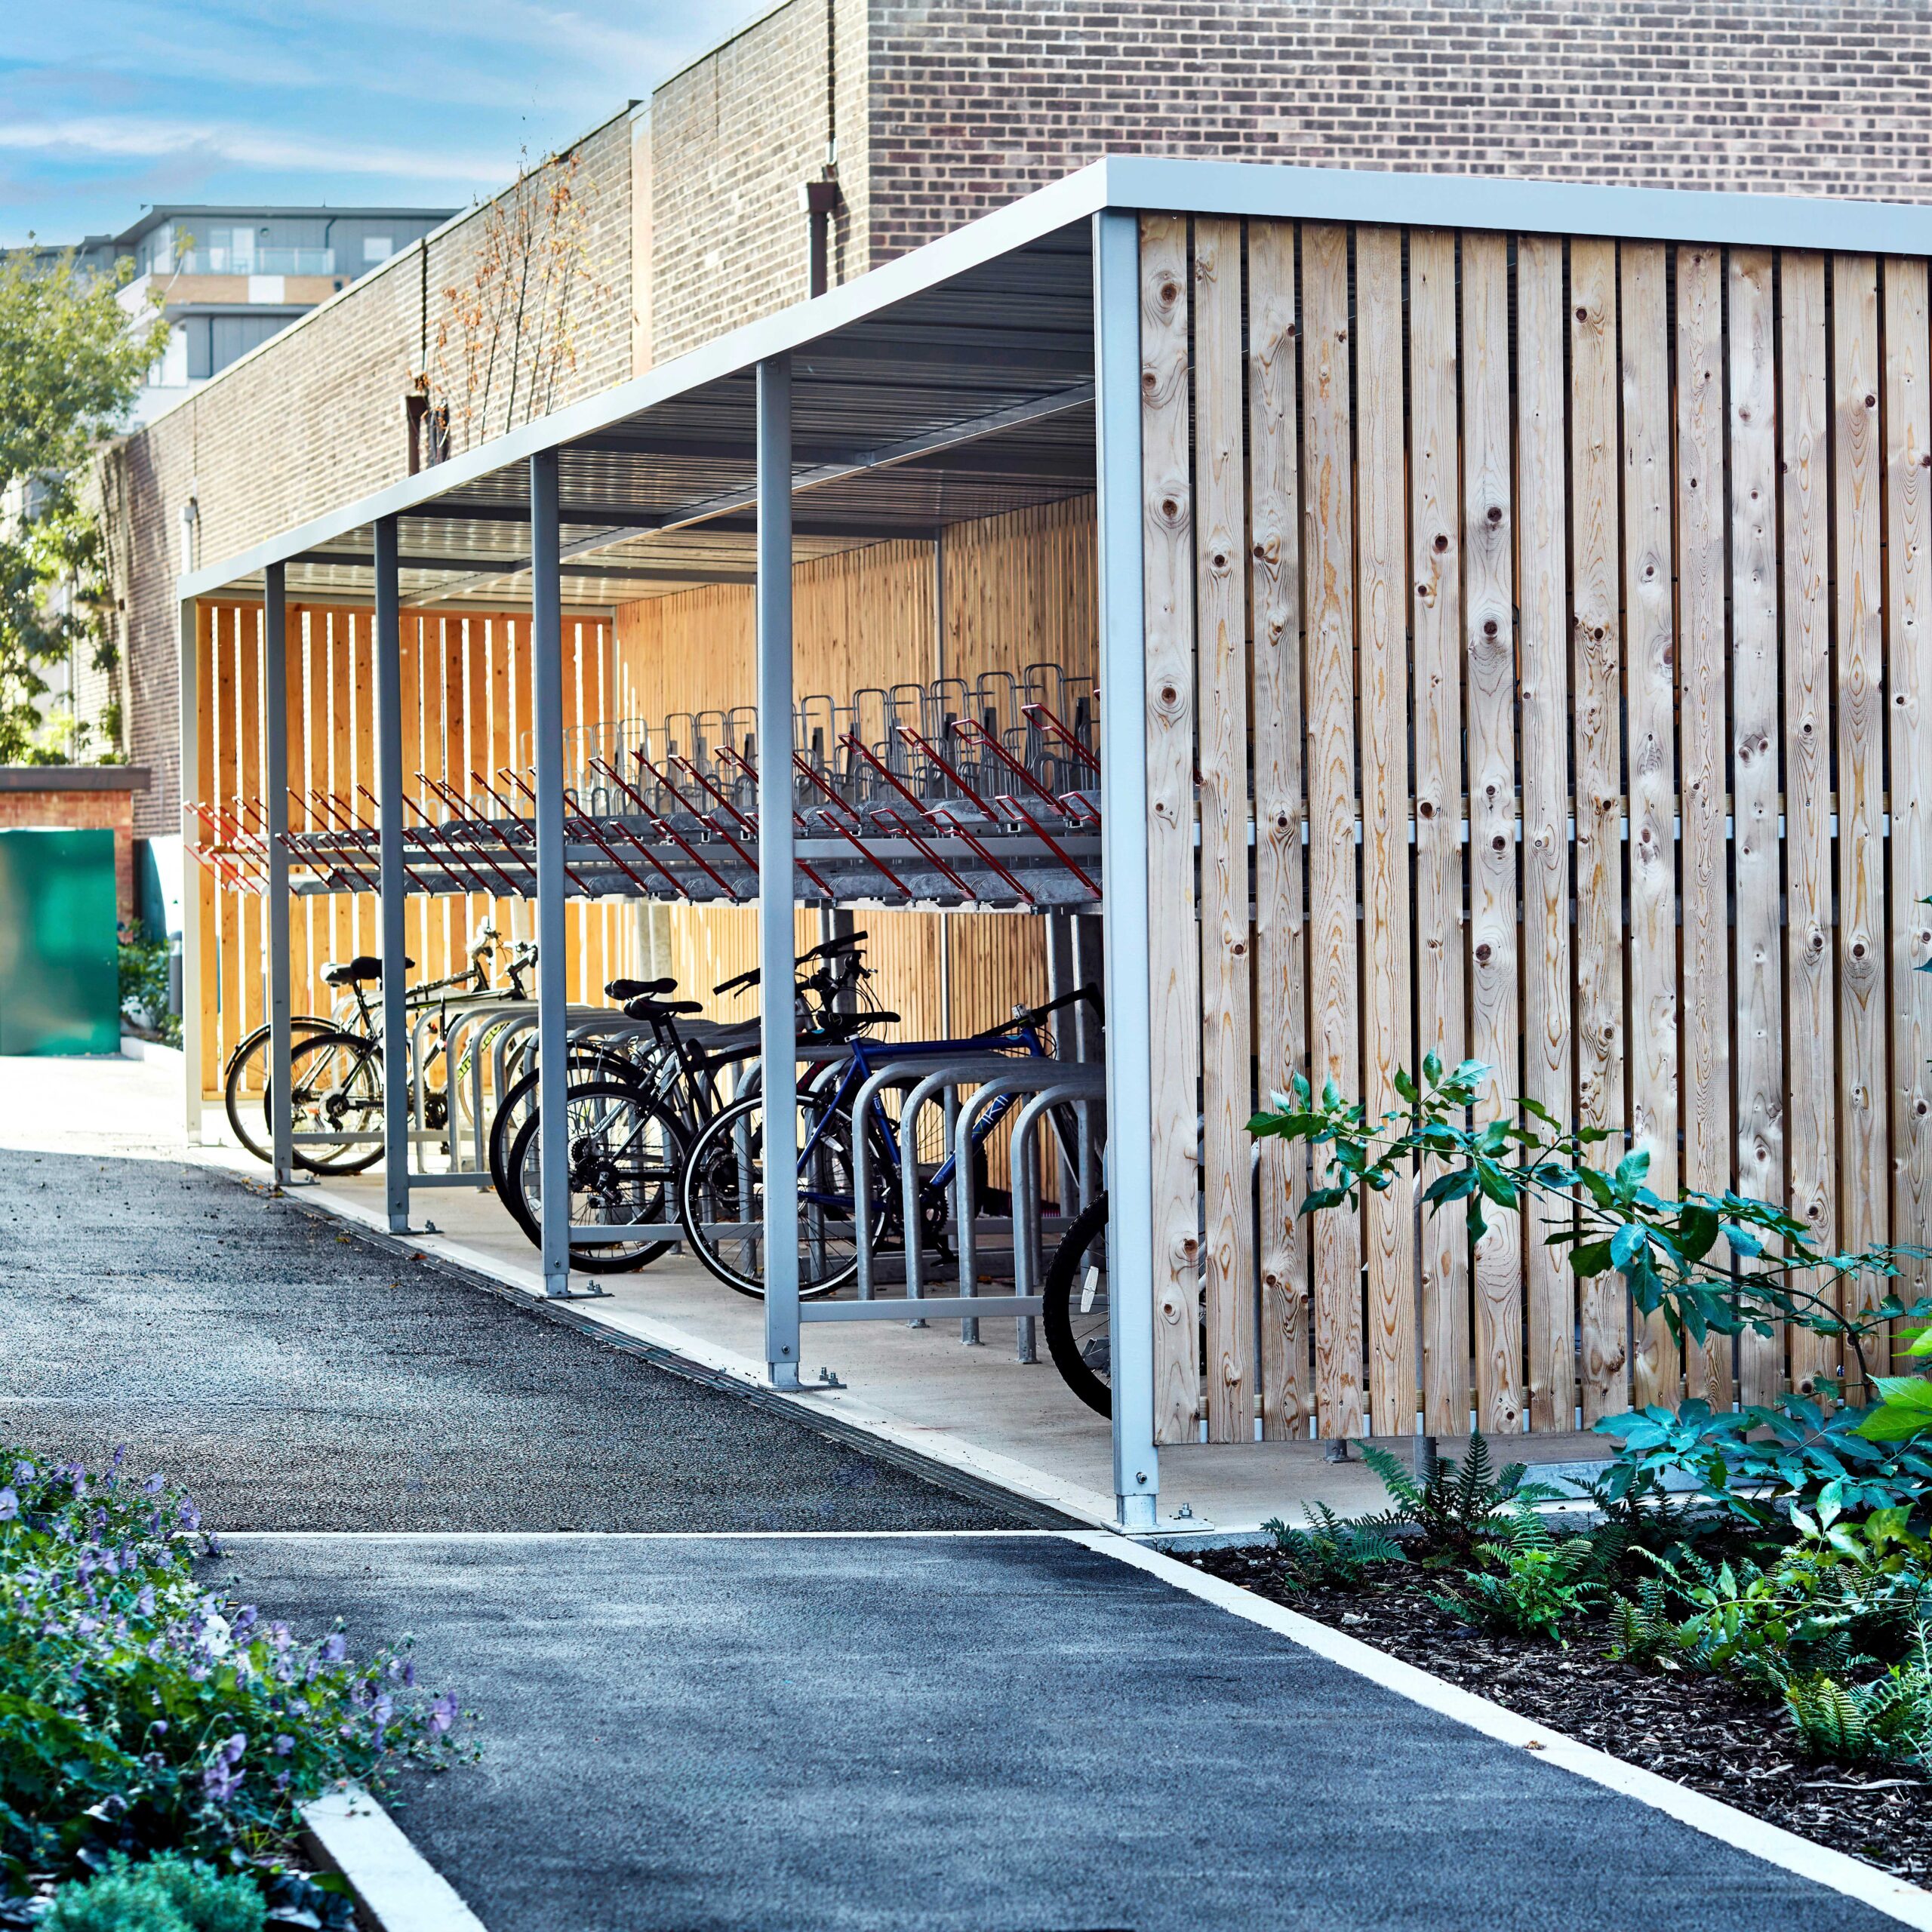 A modern, covered bicycle parking area with empty racks and a few parked bicycles, featuring a wooden back wall and metal supports.